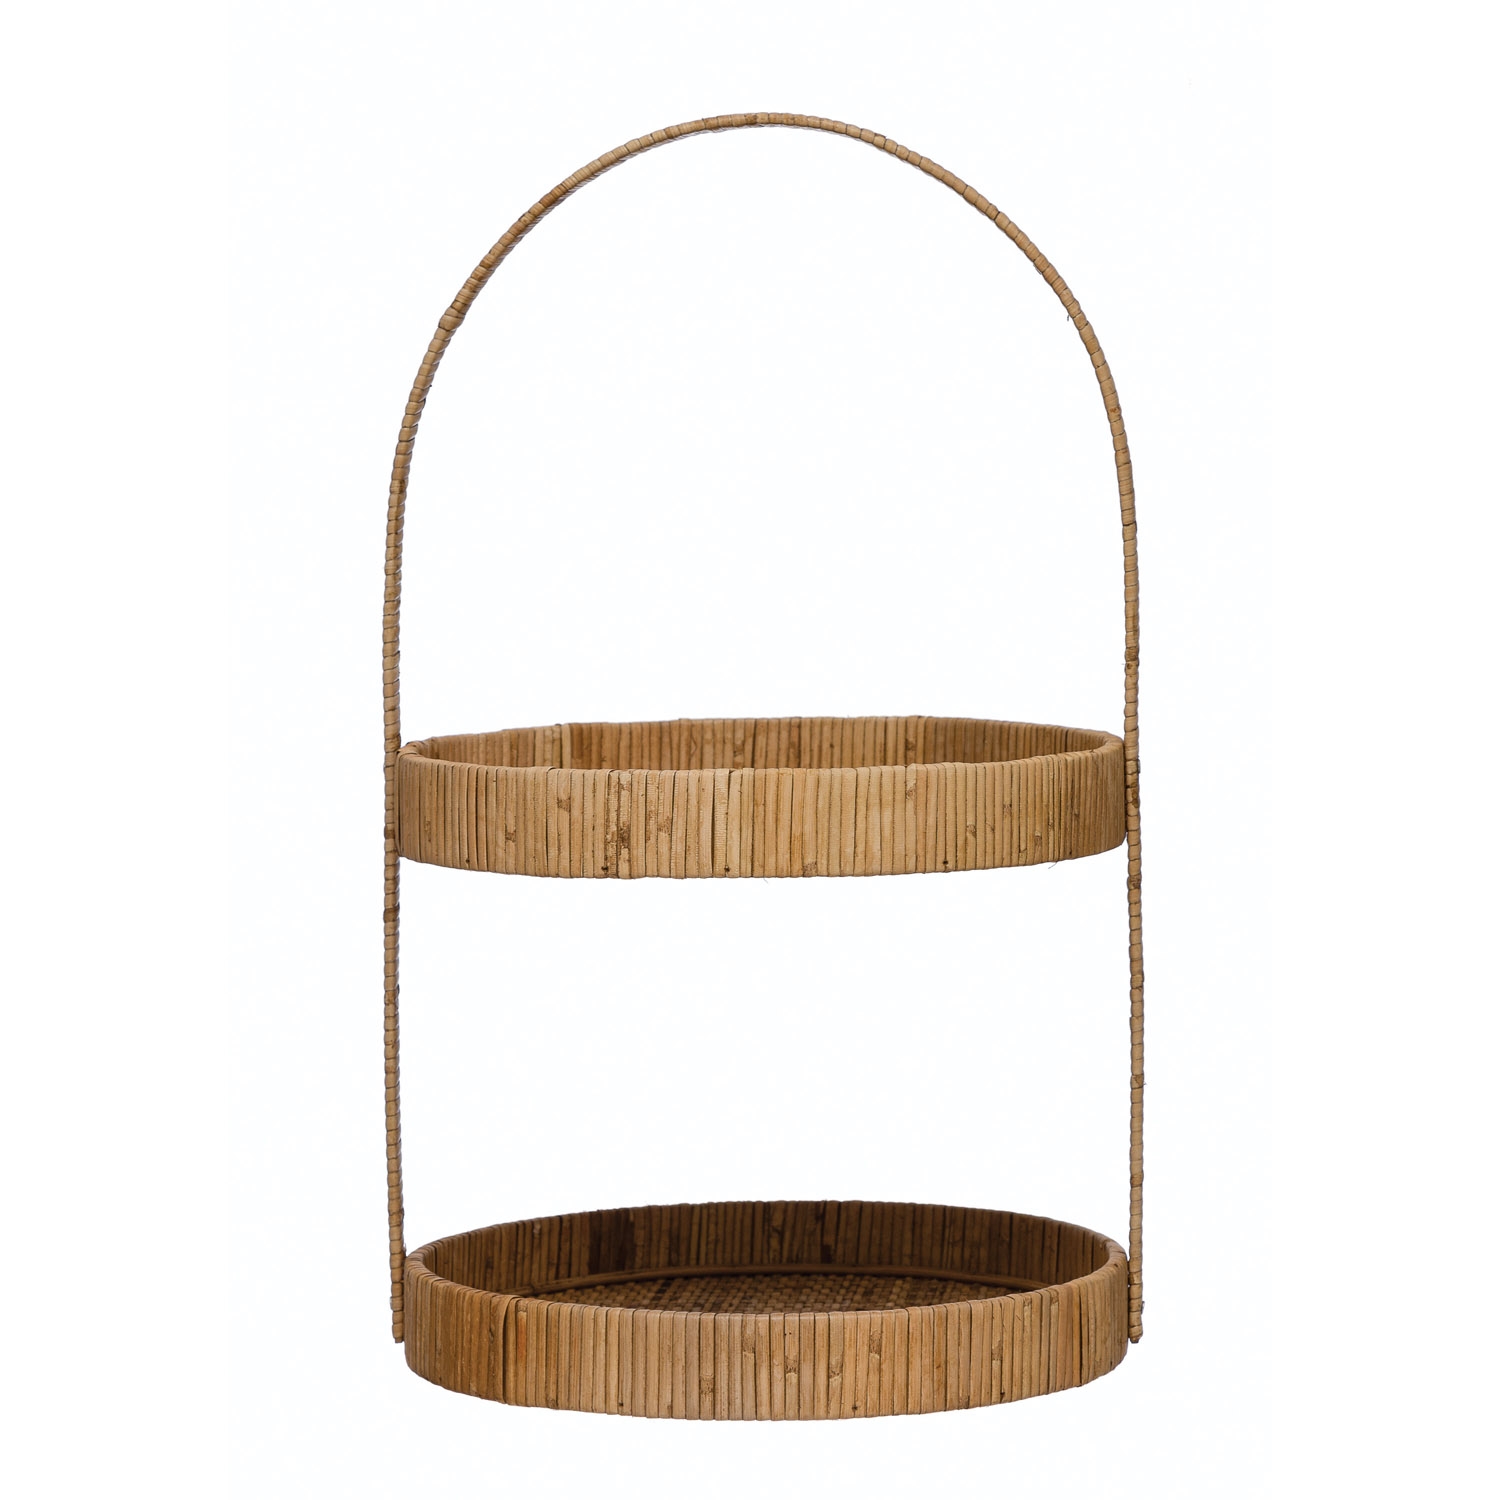 Decorative Hand-Woven Rattan 2-Tier Tray with Handle - Image 0